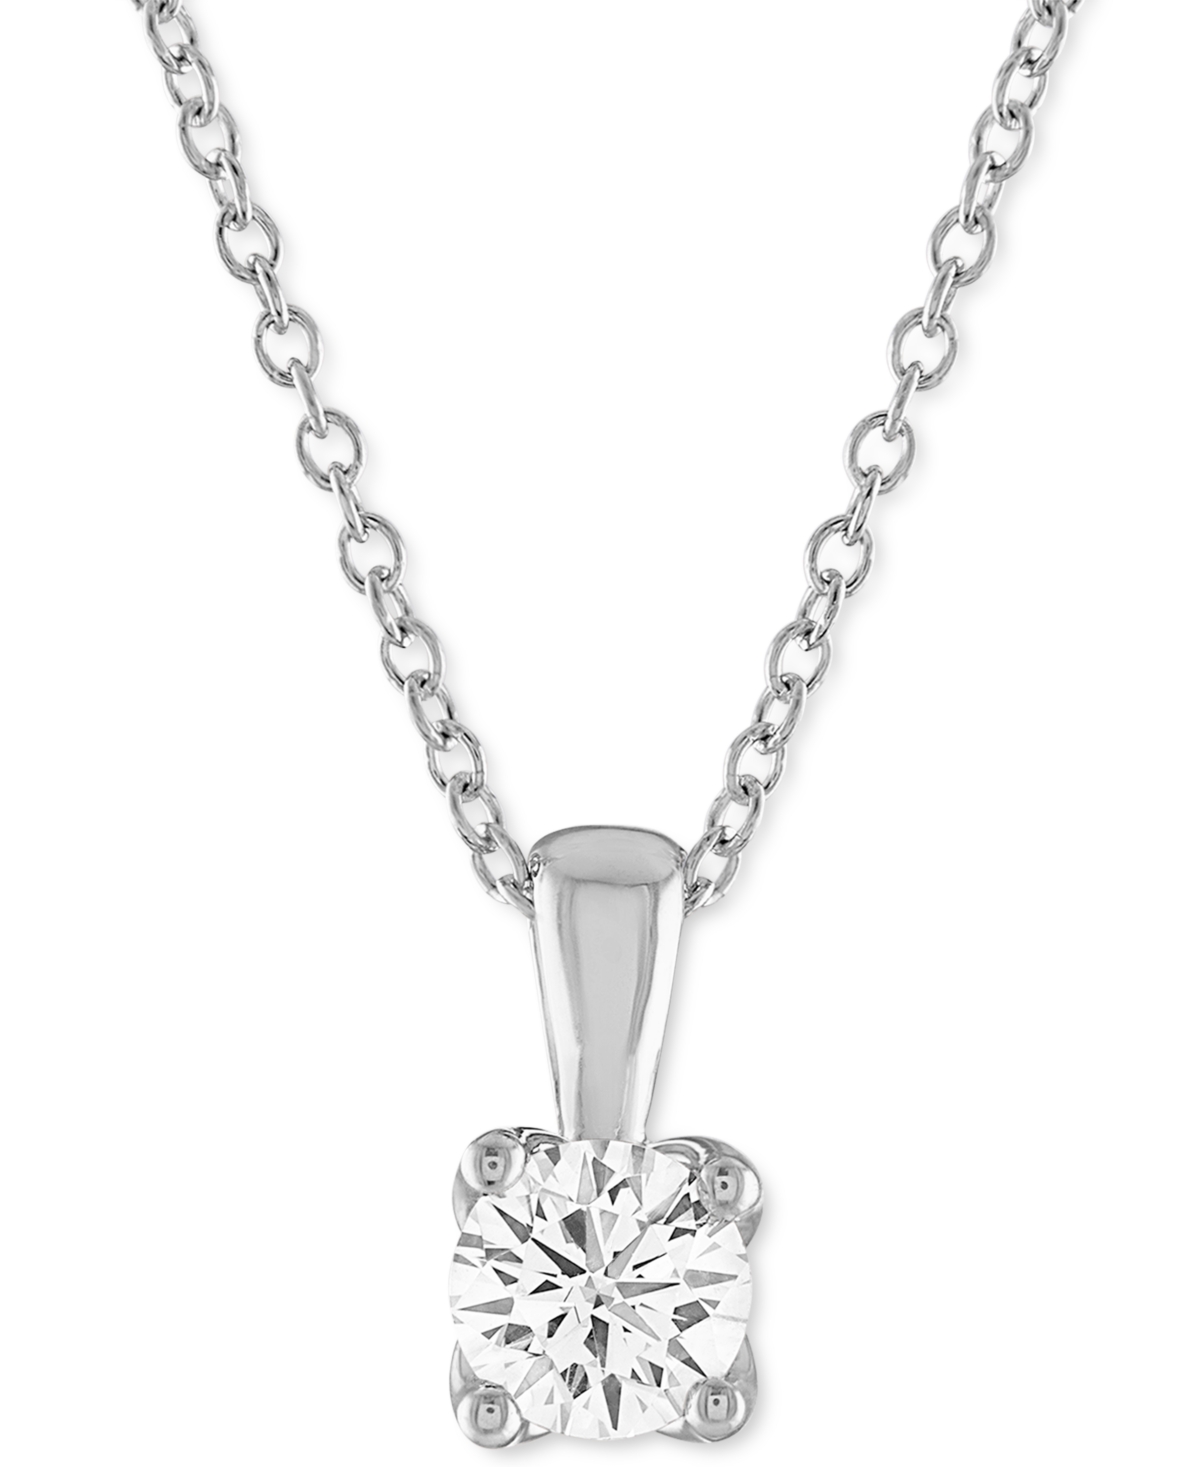 Certified Diamond 18" Pendant Necklace (1/2 ct. t.w.) in 14k White Gold featuring diamonds with the De Beers Code of Origin, Created for Macy'